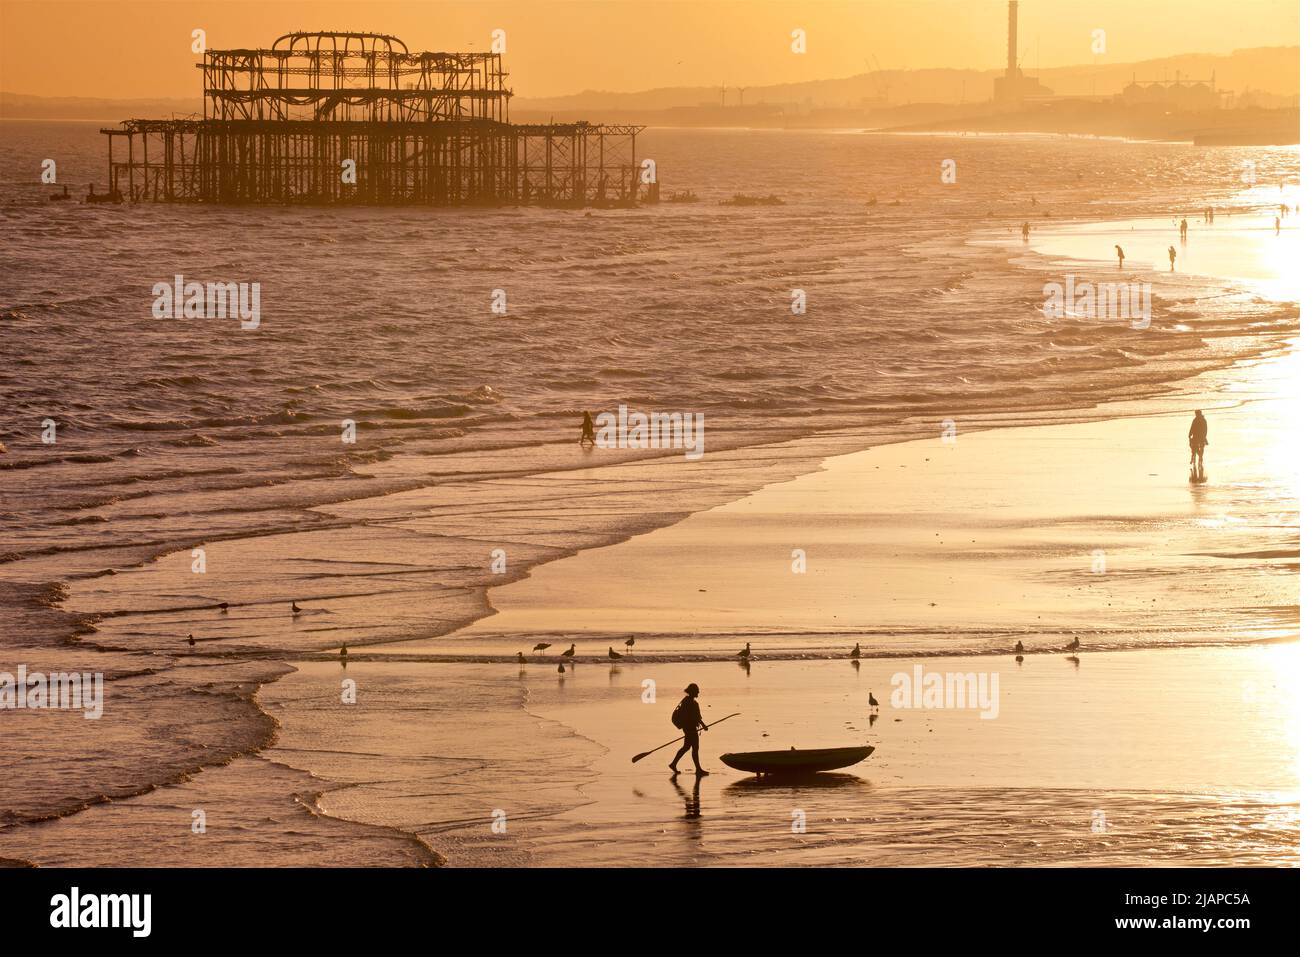 Silhouetted shapes of man with a kayak on the beach at low tide, Brighton & Hove, East Sussex, England, UK. Photographed from the Palace Pier with the remains of the West Pier, and Shoreham Power Station in the distance. Walking in from the sea Stock Photo